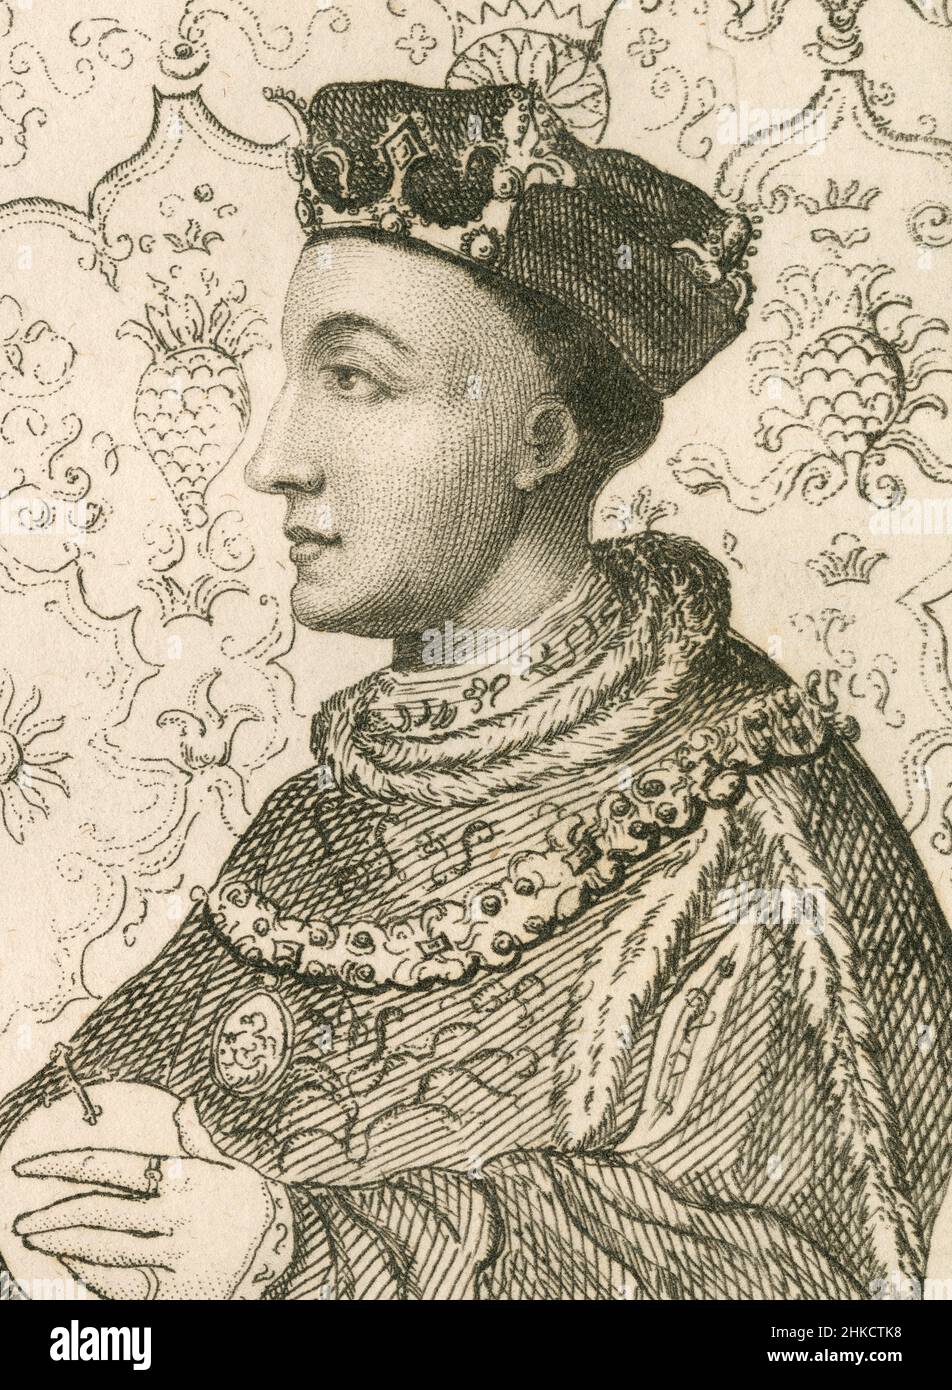 Antique circa 1812 etching of Henry V of England. Henry V (1386-1422), also called Henry of Monmouth, was King of England from 1413 until his death in 1422. SOURCE: ORIGINAL ETCHING Stock Photo